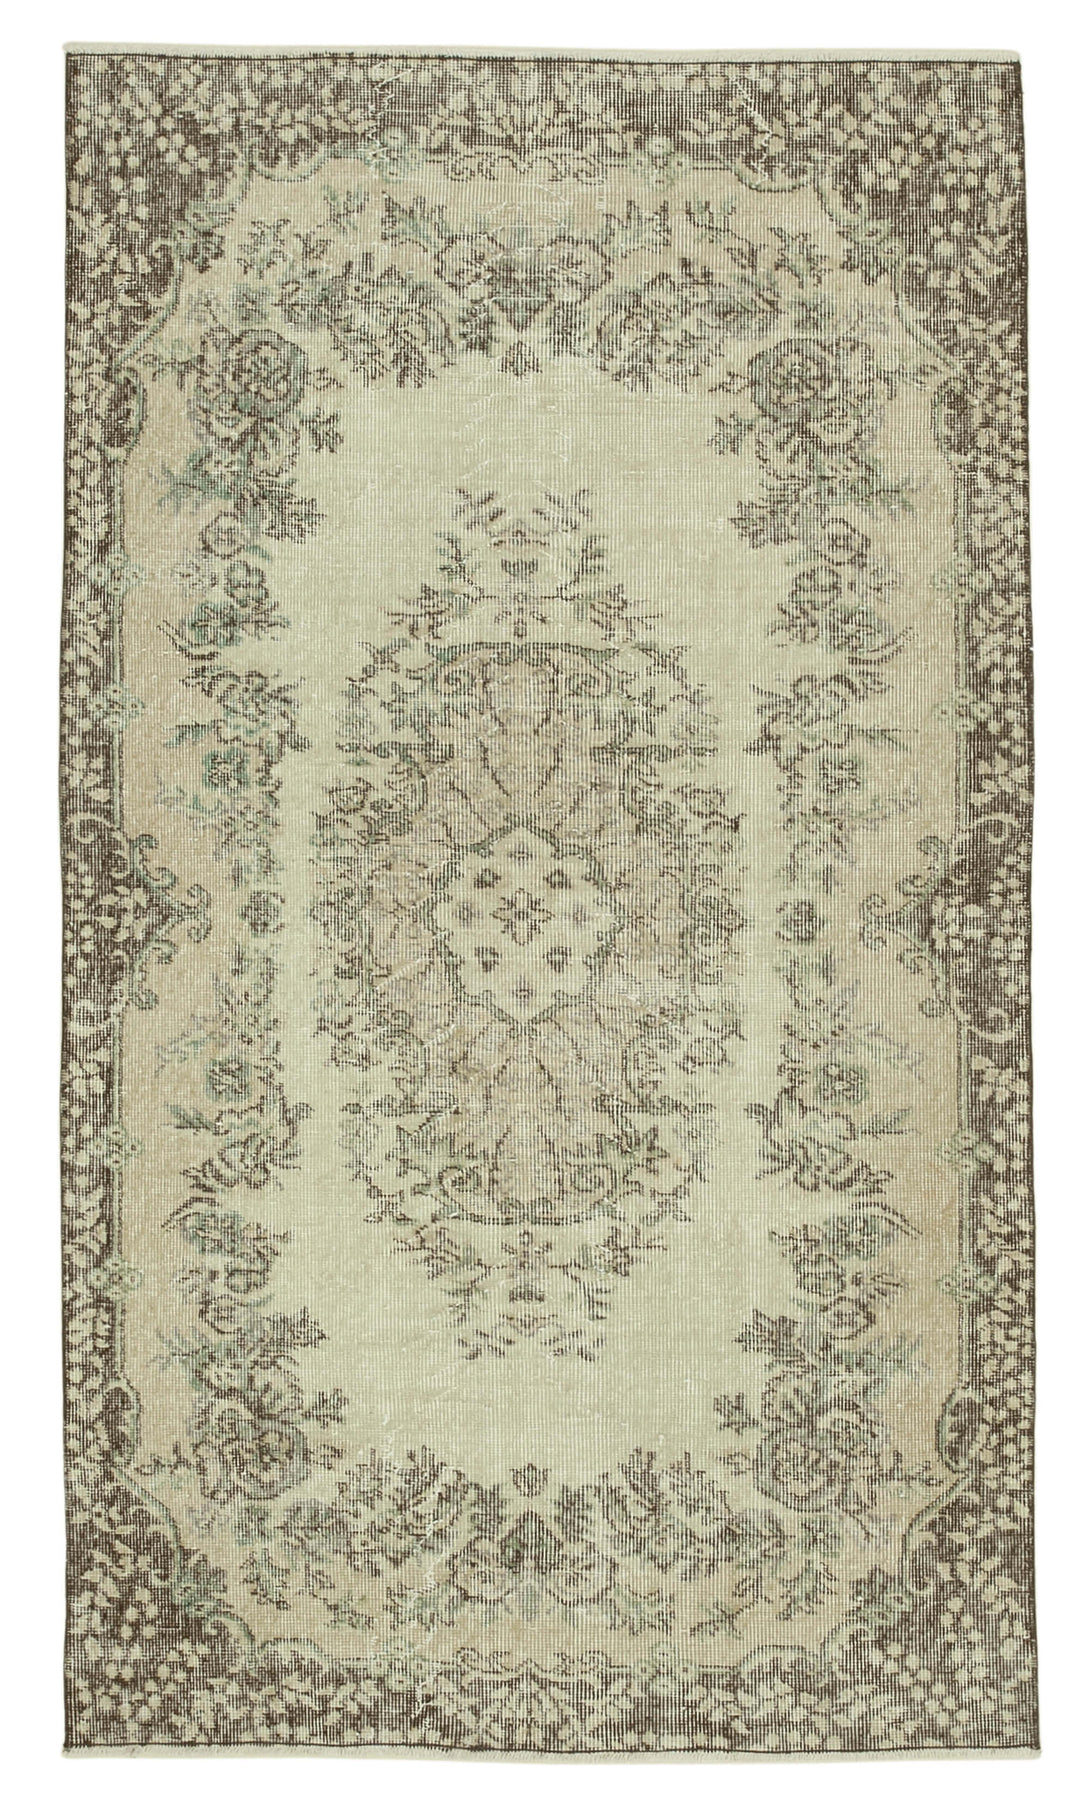 Handmade Overdyed Area Rug > Design# OL-AC-31243 > Size: 3'-9" x 6'-8", Carpet Culture Rugs, Handmade Rugs, NYC Rugs, New Rugs, Shop Rugs, Rug Store, Outlet Rugs, SoHo Rugs, Rugs in USA